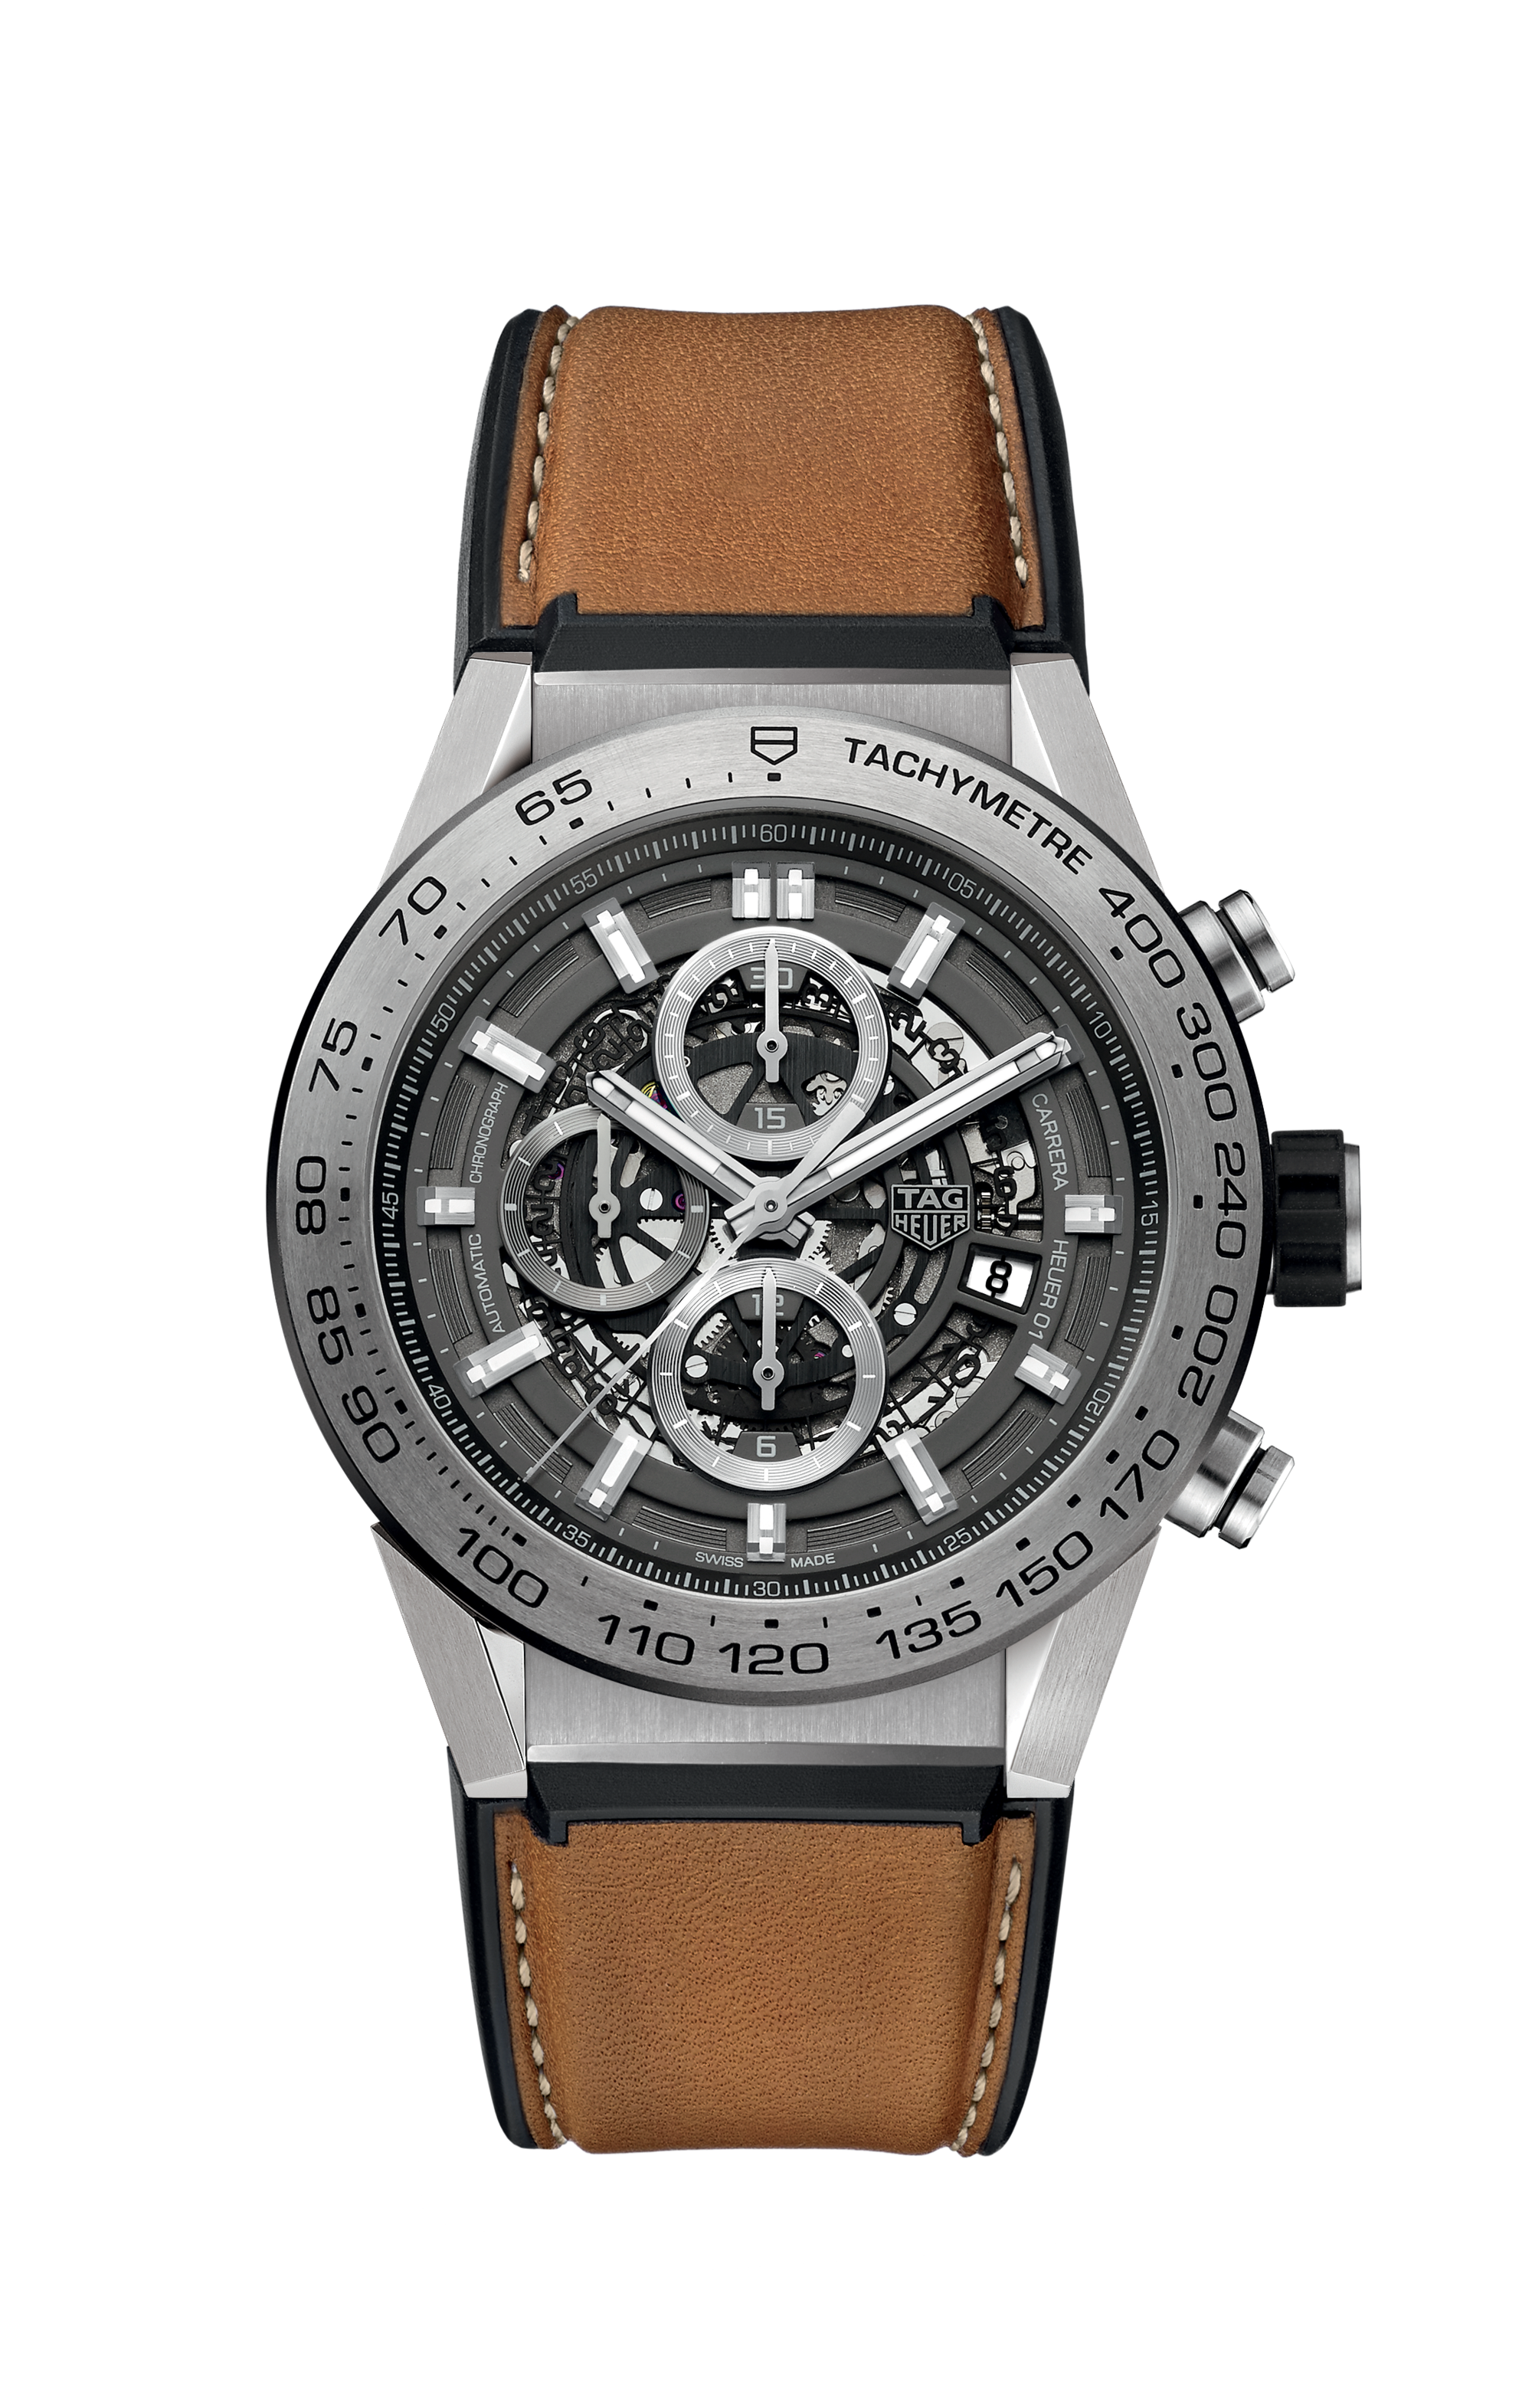 TAG Heuer Carrera Calibre HEUER 01 for $3,292 for sale from a